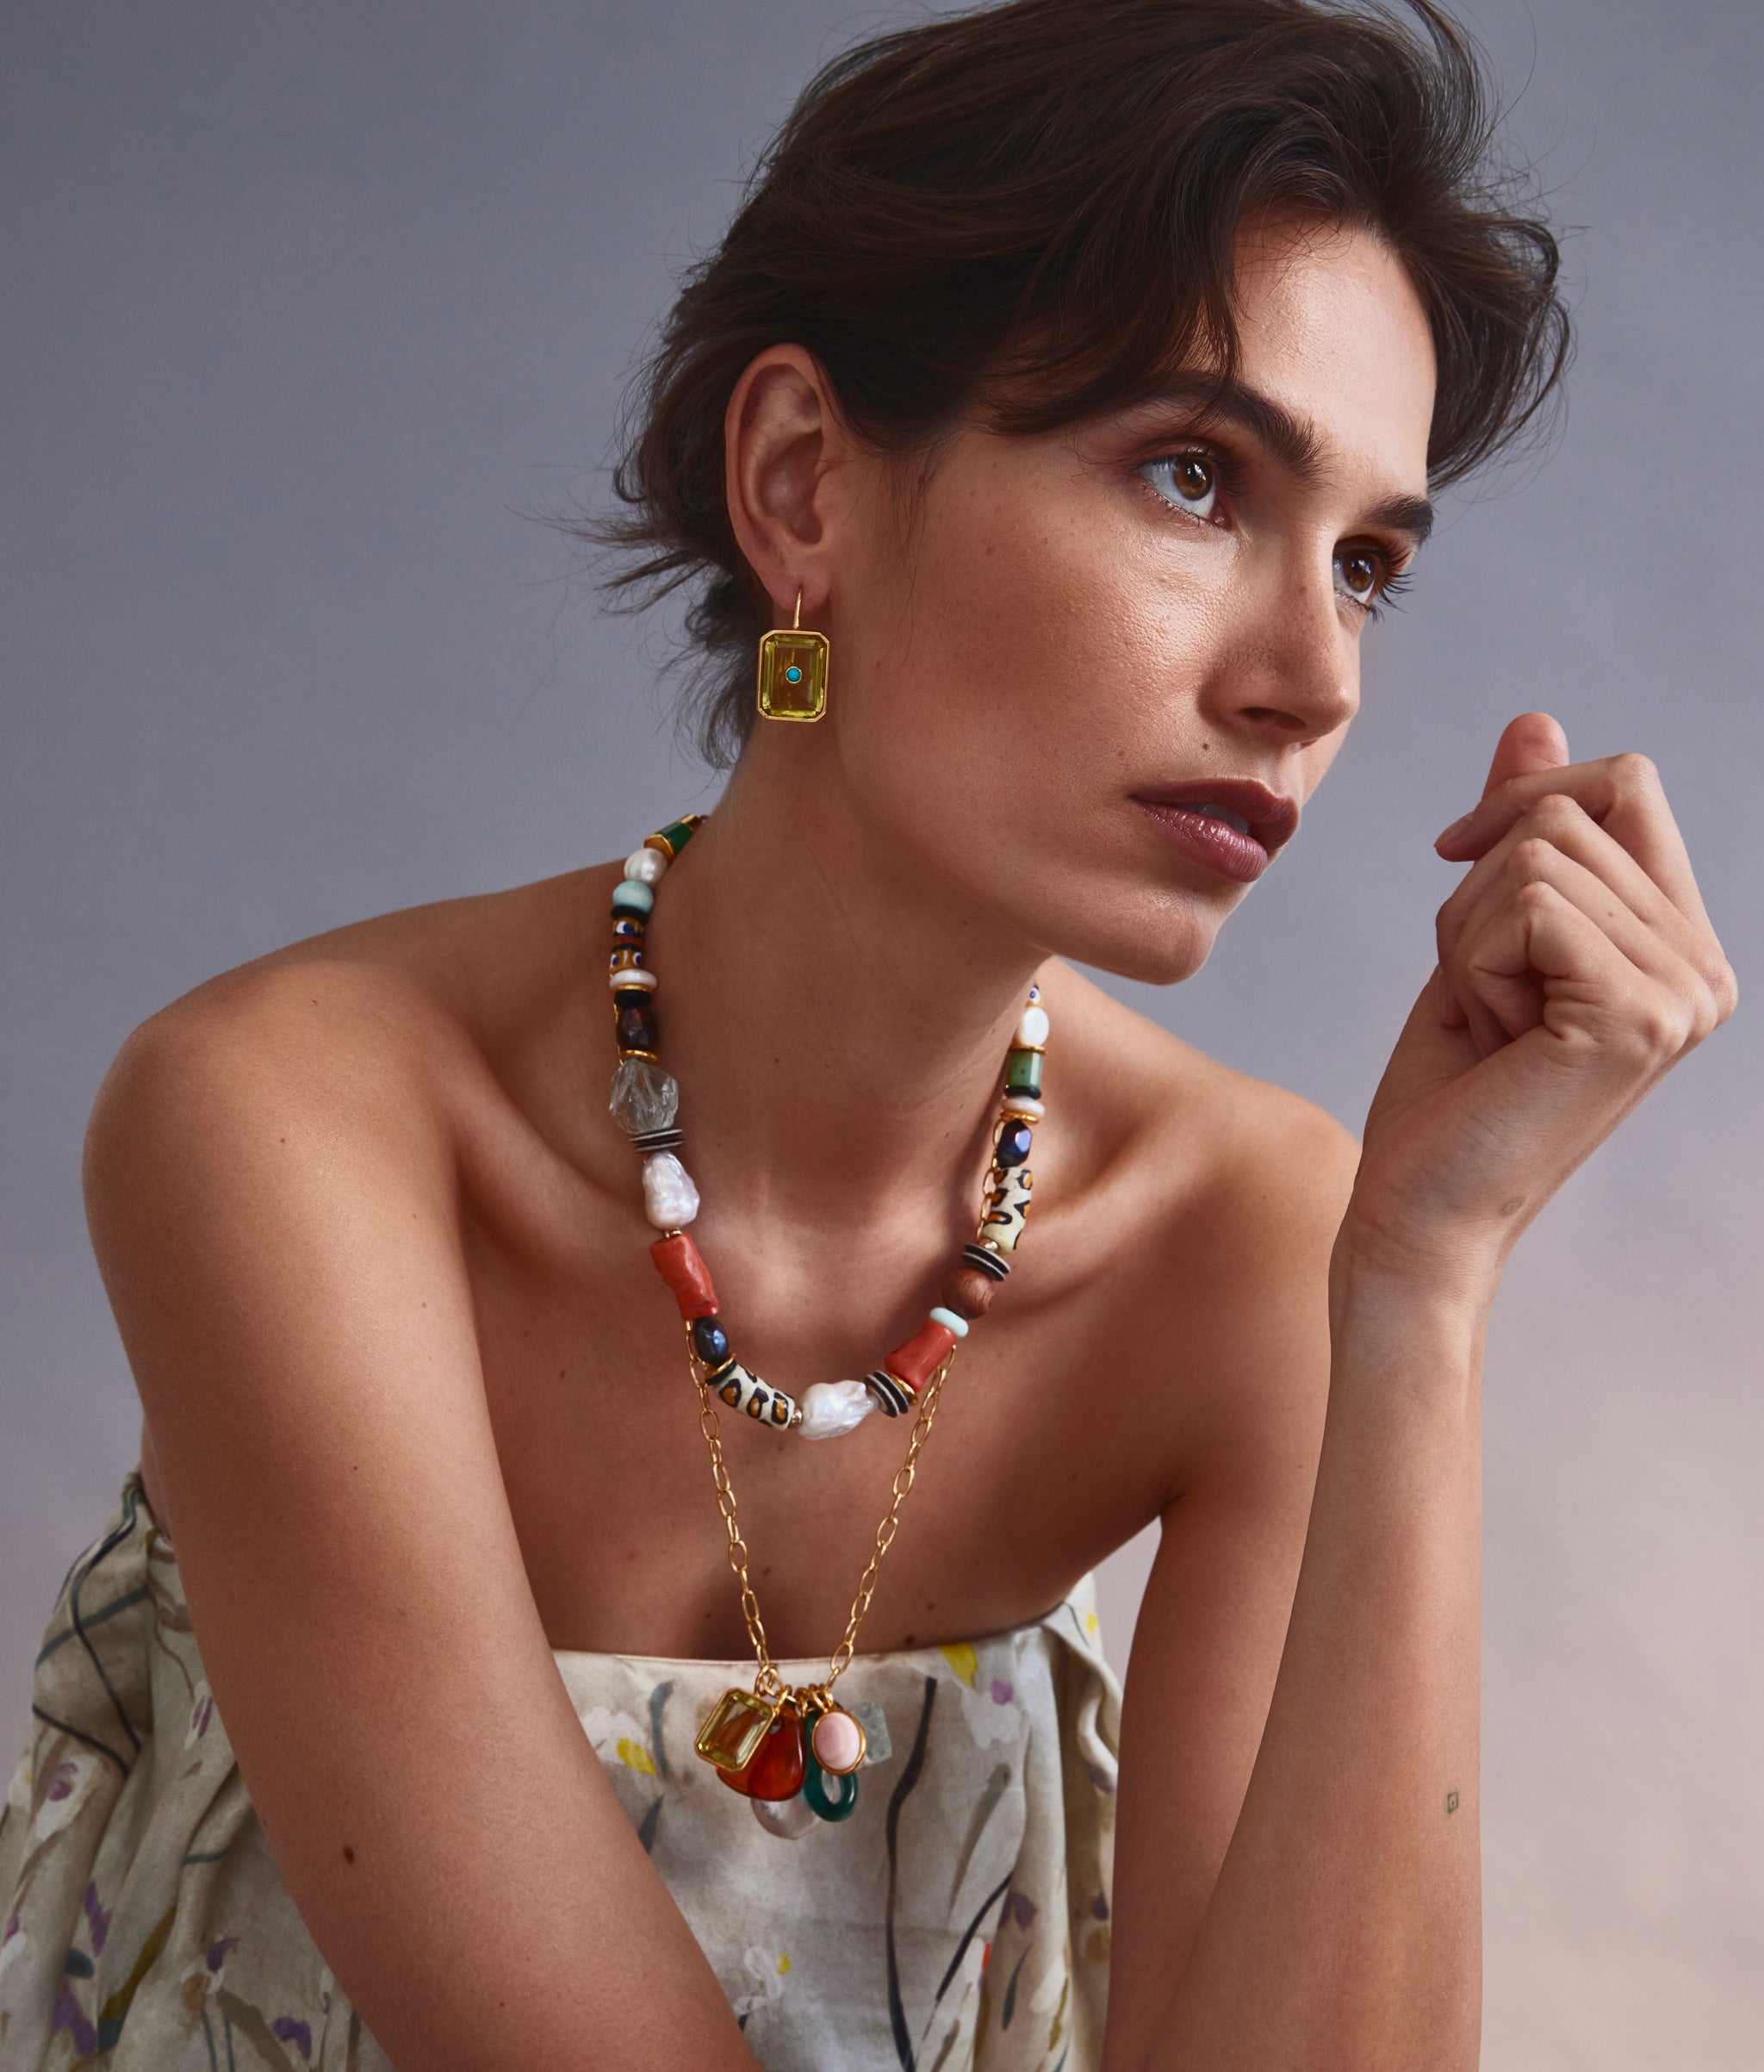 Model on grey backdrop wears dress with Eleuthera Charm Necklace, Salvador Necklace and Tile Earrings in Pineappleecklace and yellow Tile Earrings.